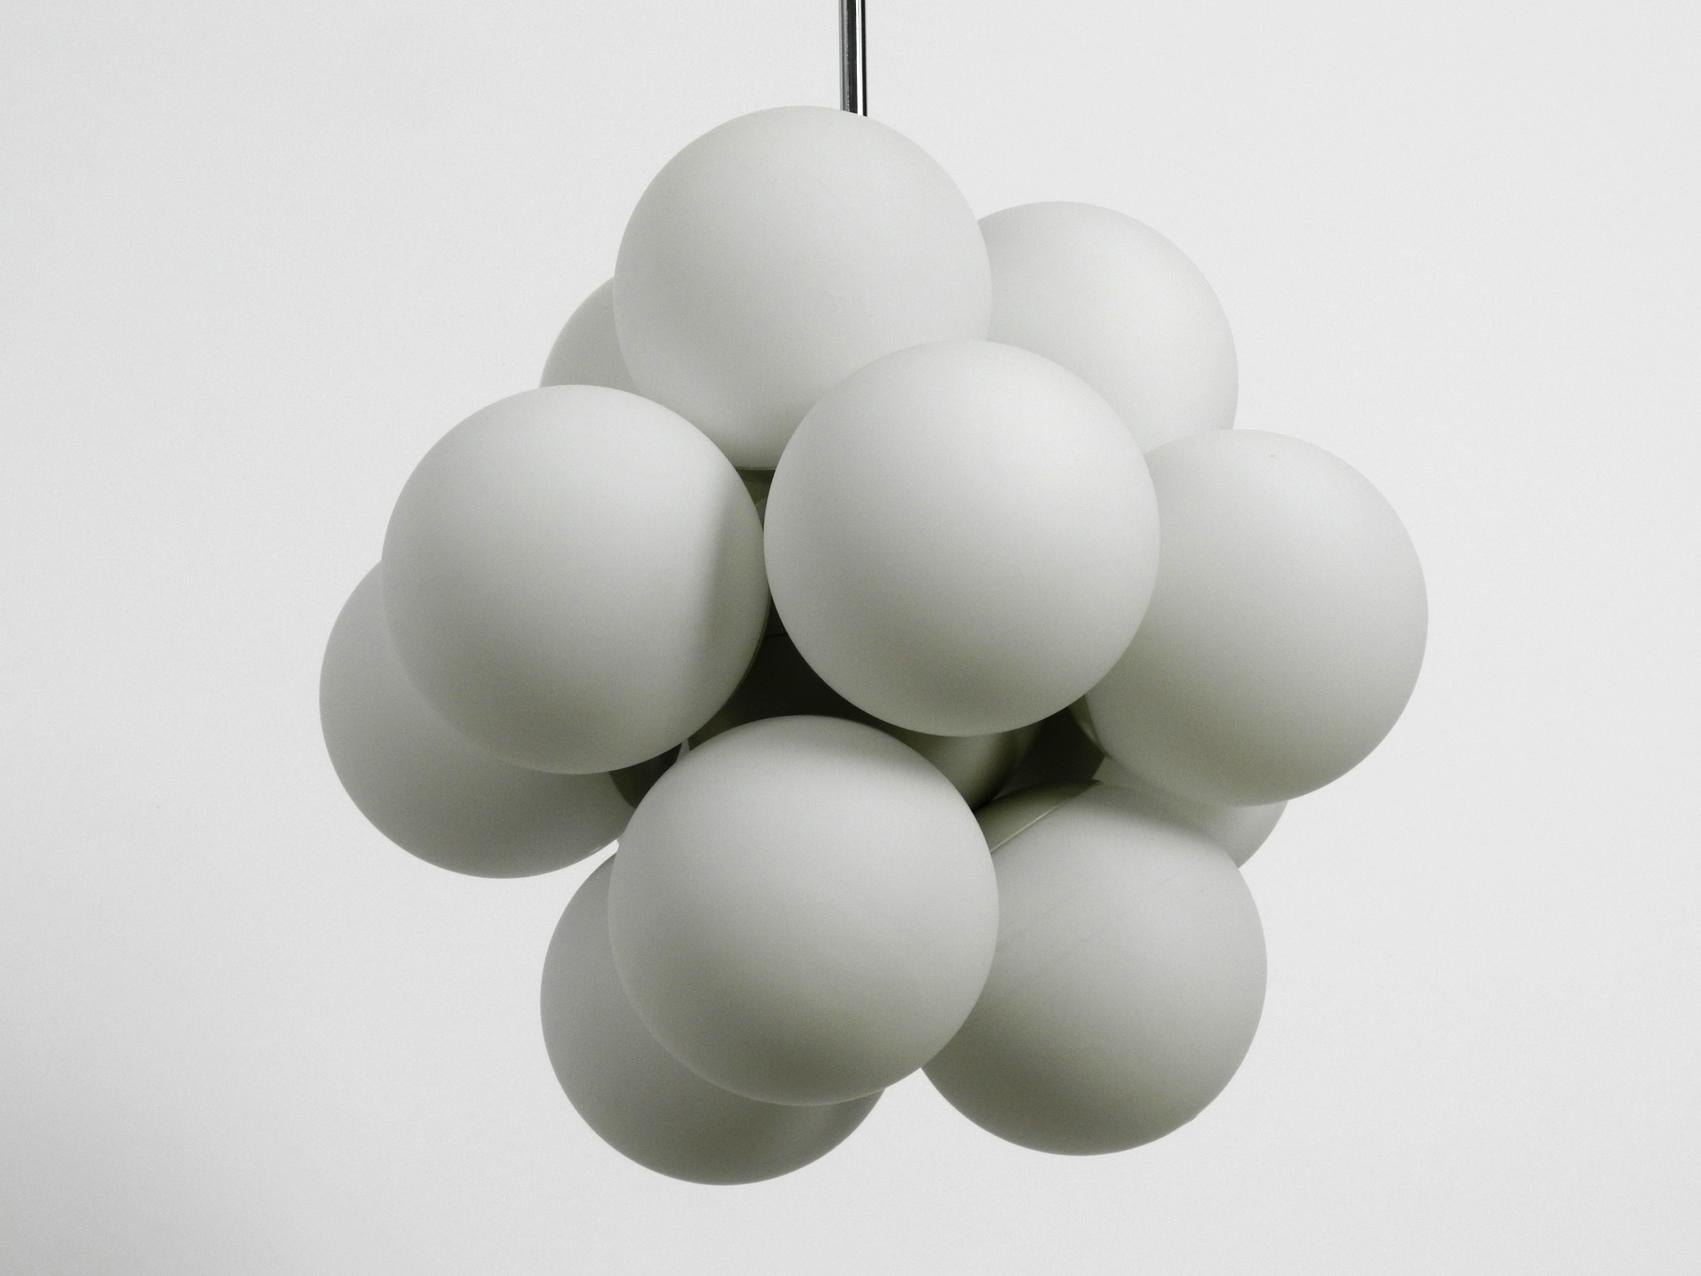 Unused 60s Atomic Space Age Kaiser Leuchten metal ceiling lamp 12 glass spheres For Sale 1